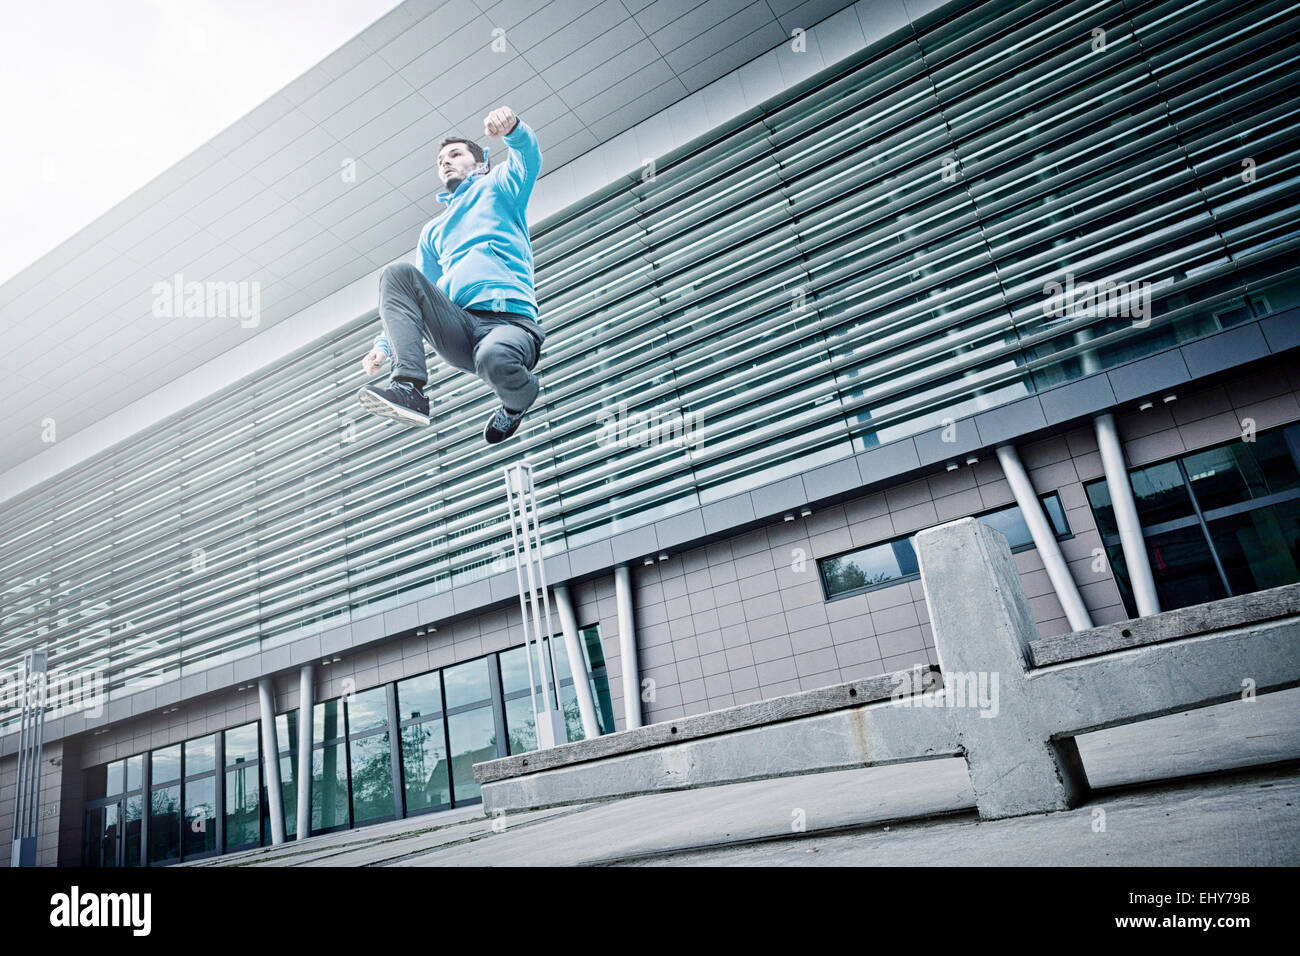 Male runner jumping in city Stock Photo